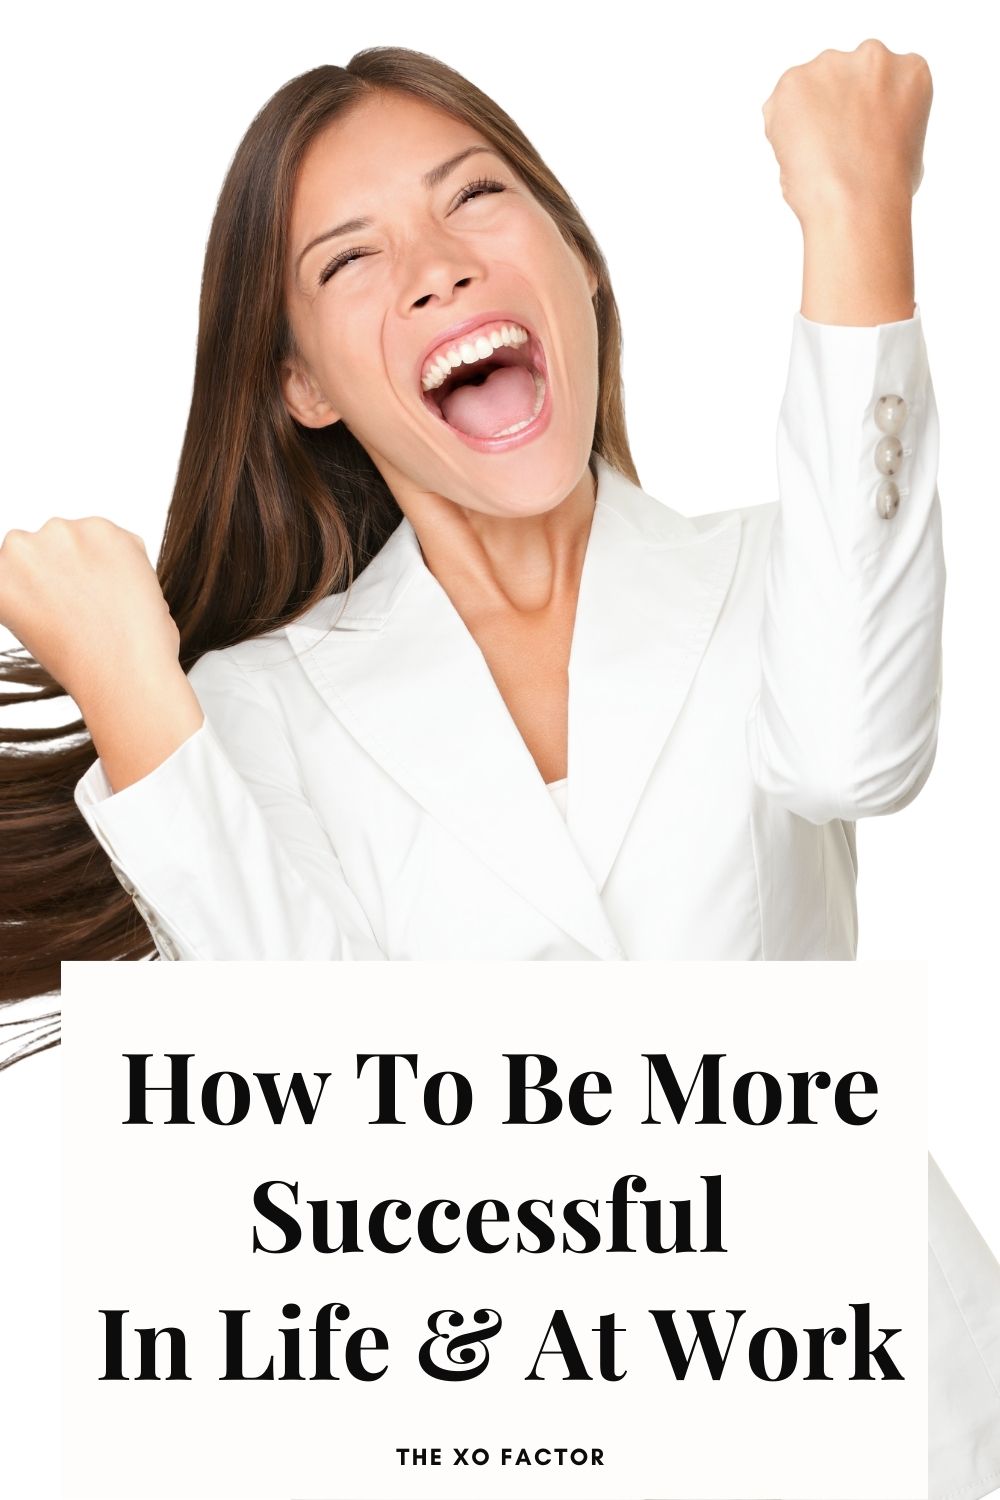 How To Be More Successful In Life & At Work